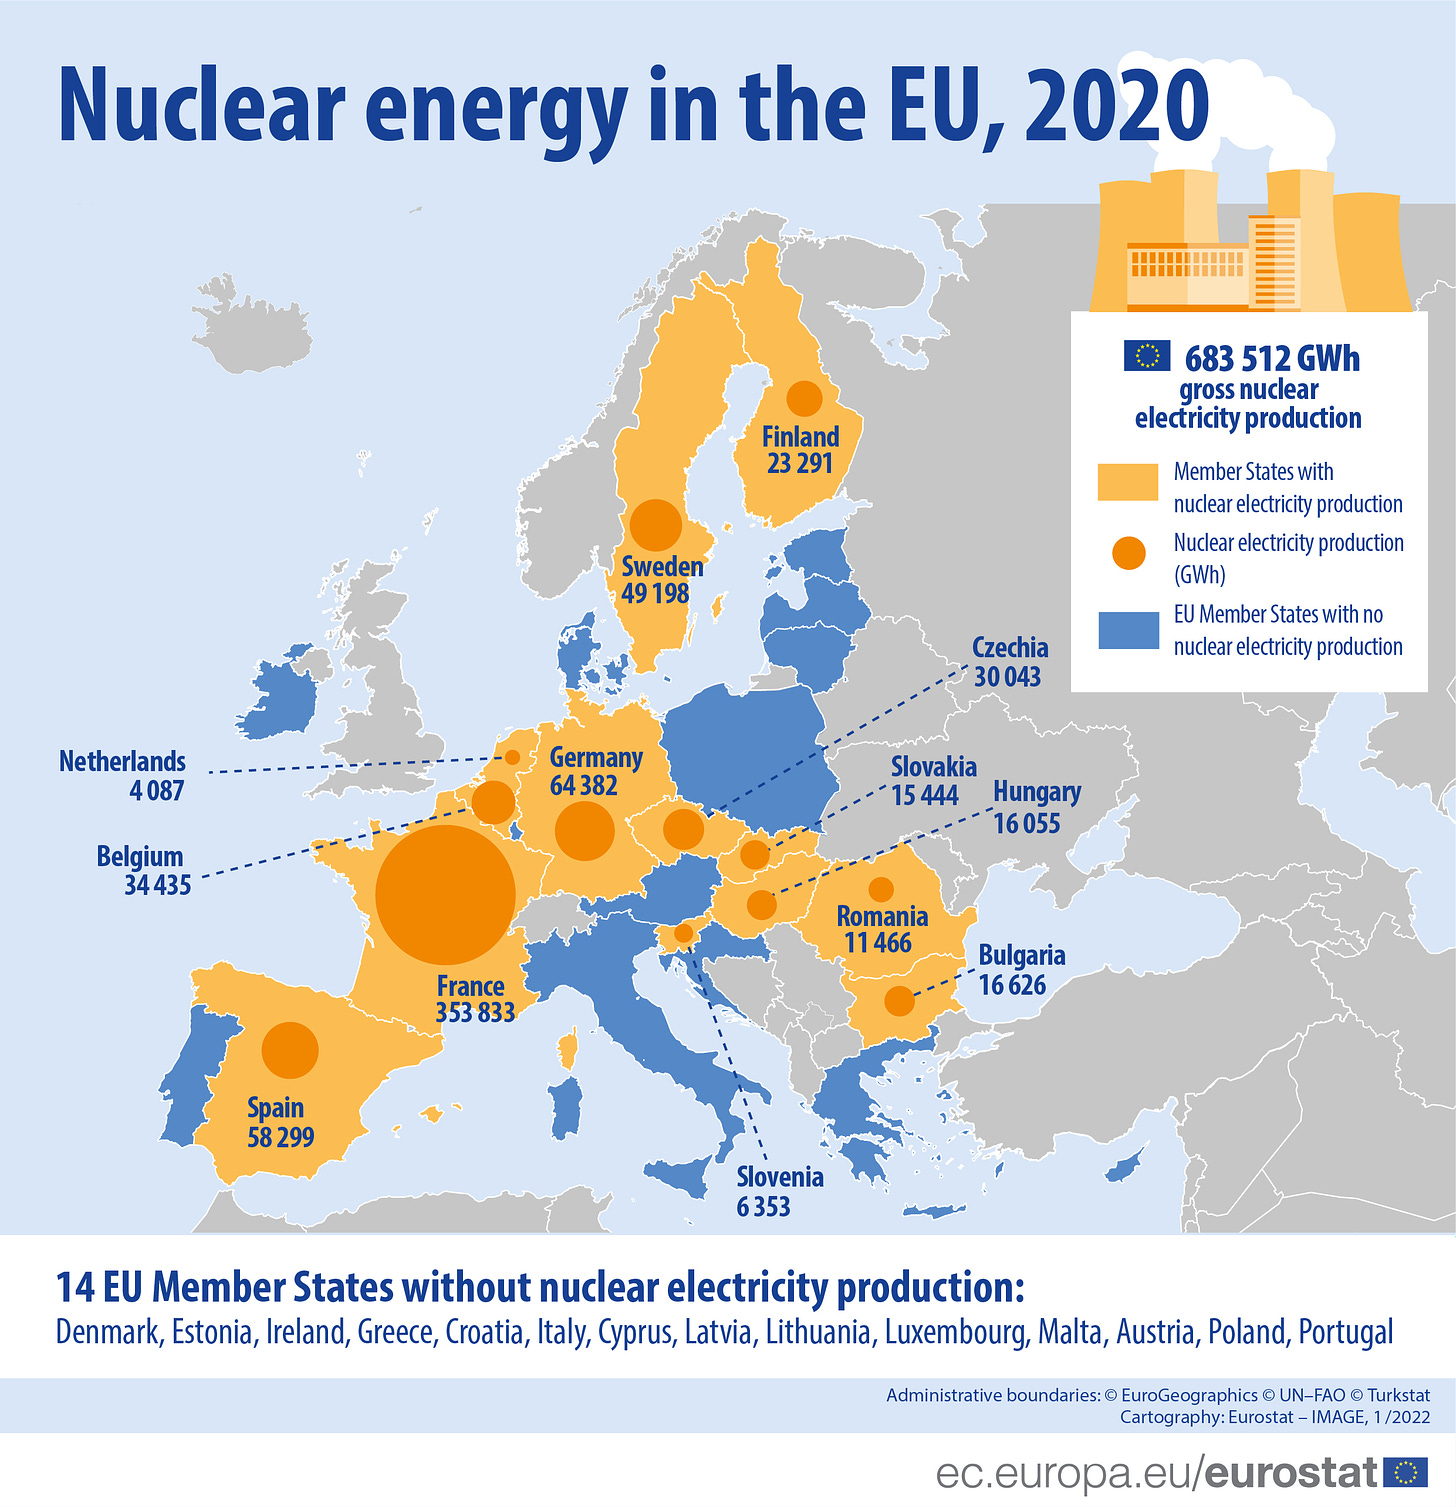 Much of the hope lies in nuclear power, which accounts for 25% of the European Union's electricity production.